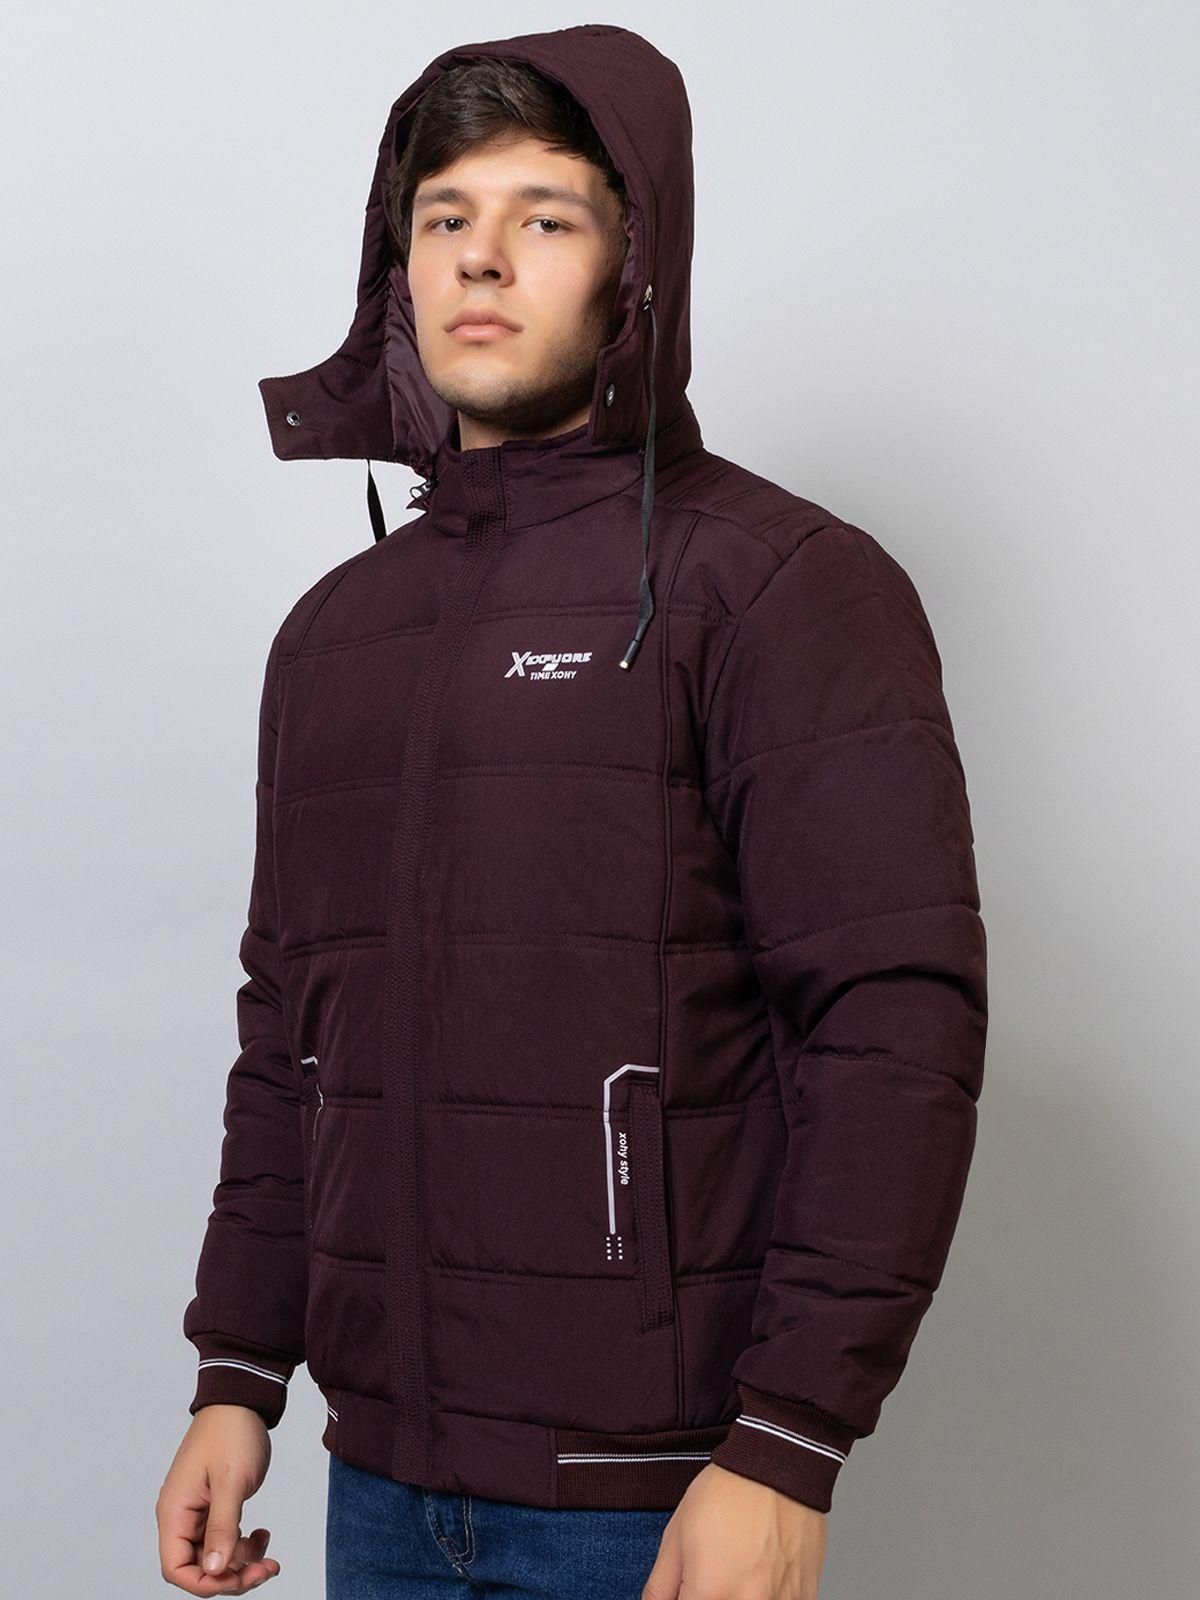 Xohy Men's Full Sleeve Tailored Puffer Wine Hooded Jacket